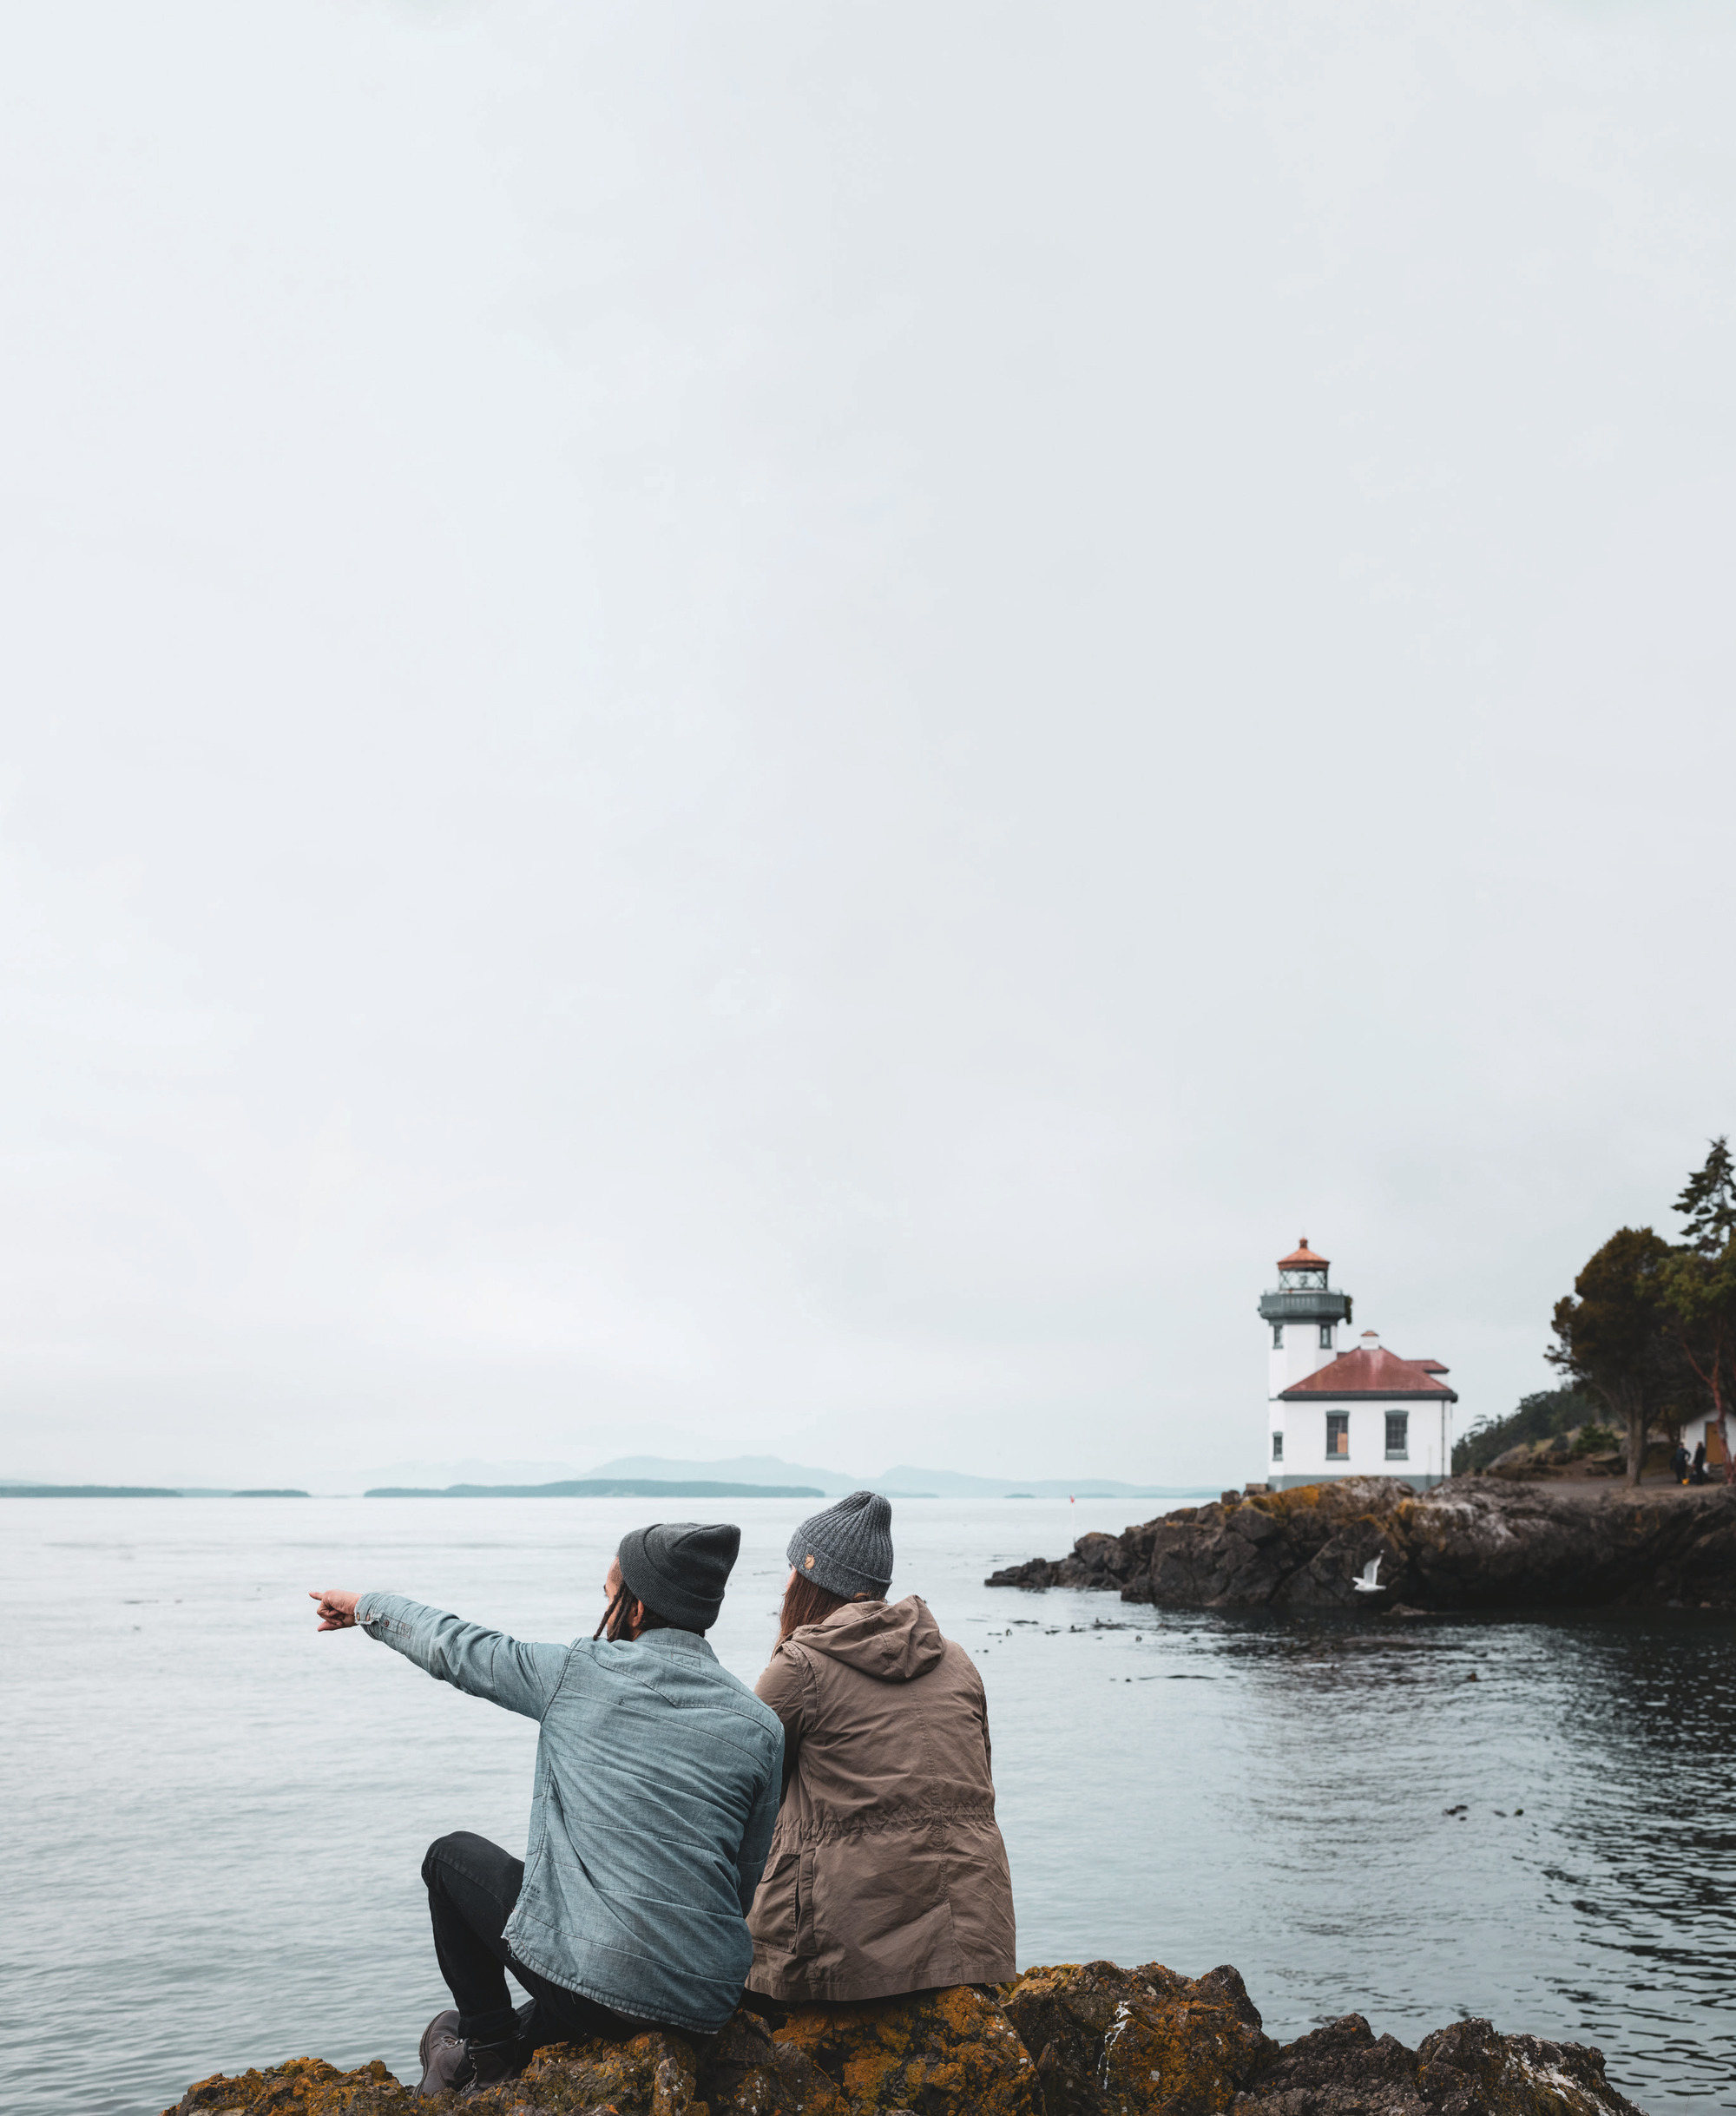 Enjoy world-class whale watching at Lime Kiln Point State Park on San Juan Island.